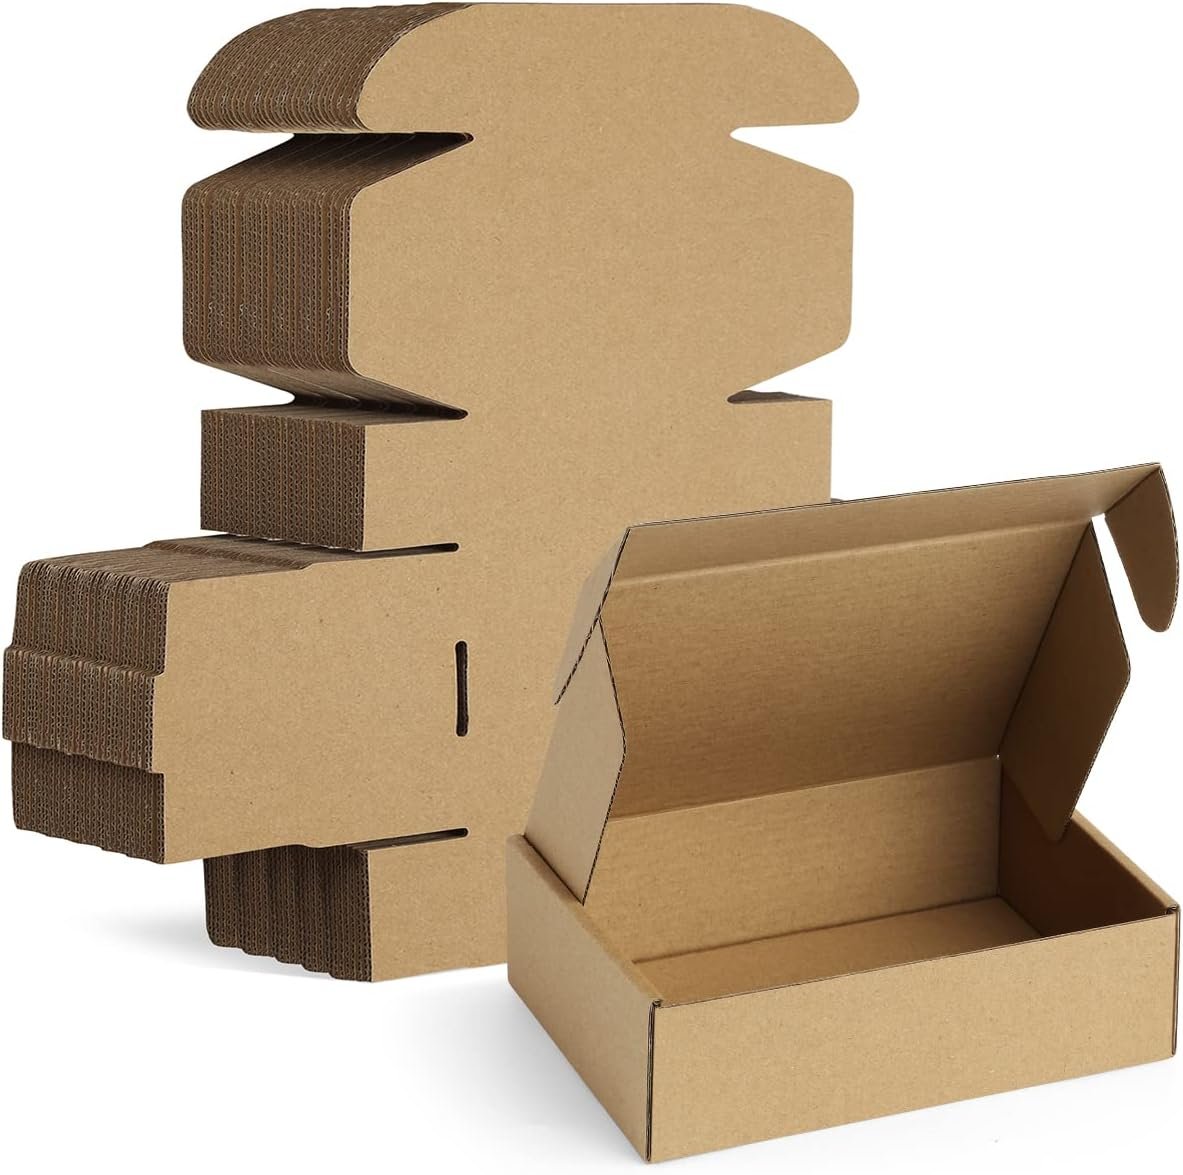 Famagic 12Pack 7x5x2 Small Mailing Boxes Review